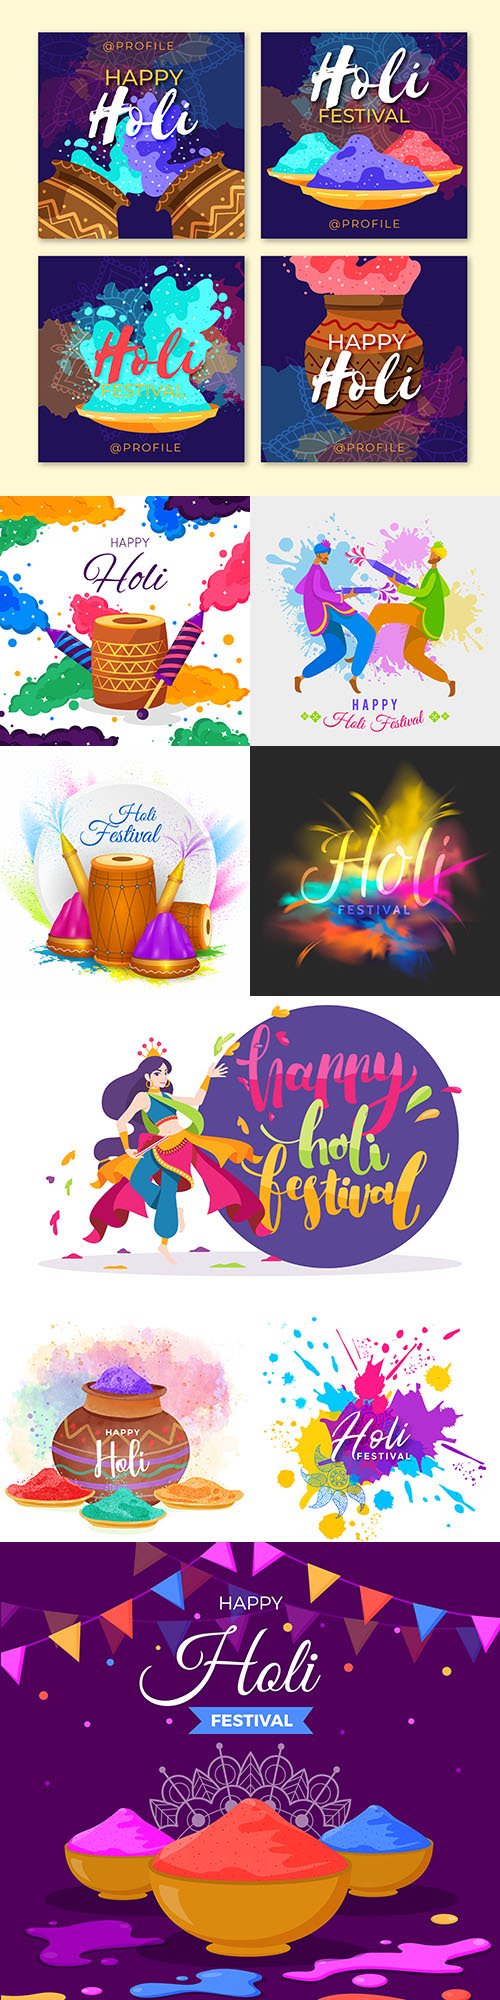 Happy holi traditional festival colorful illustrations